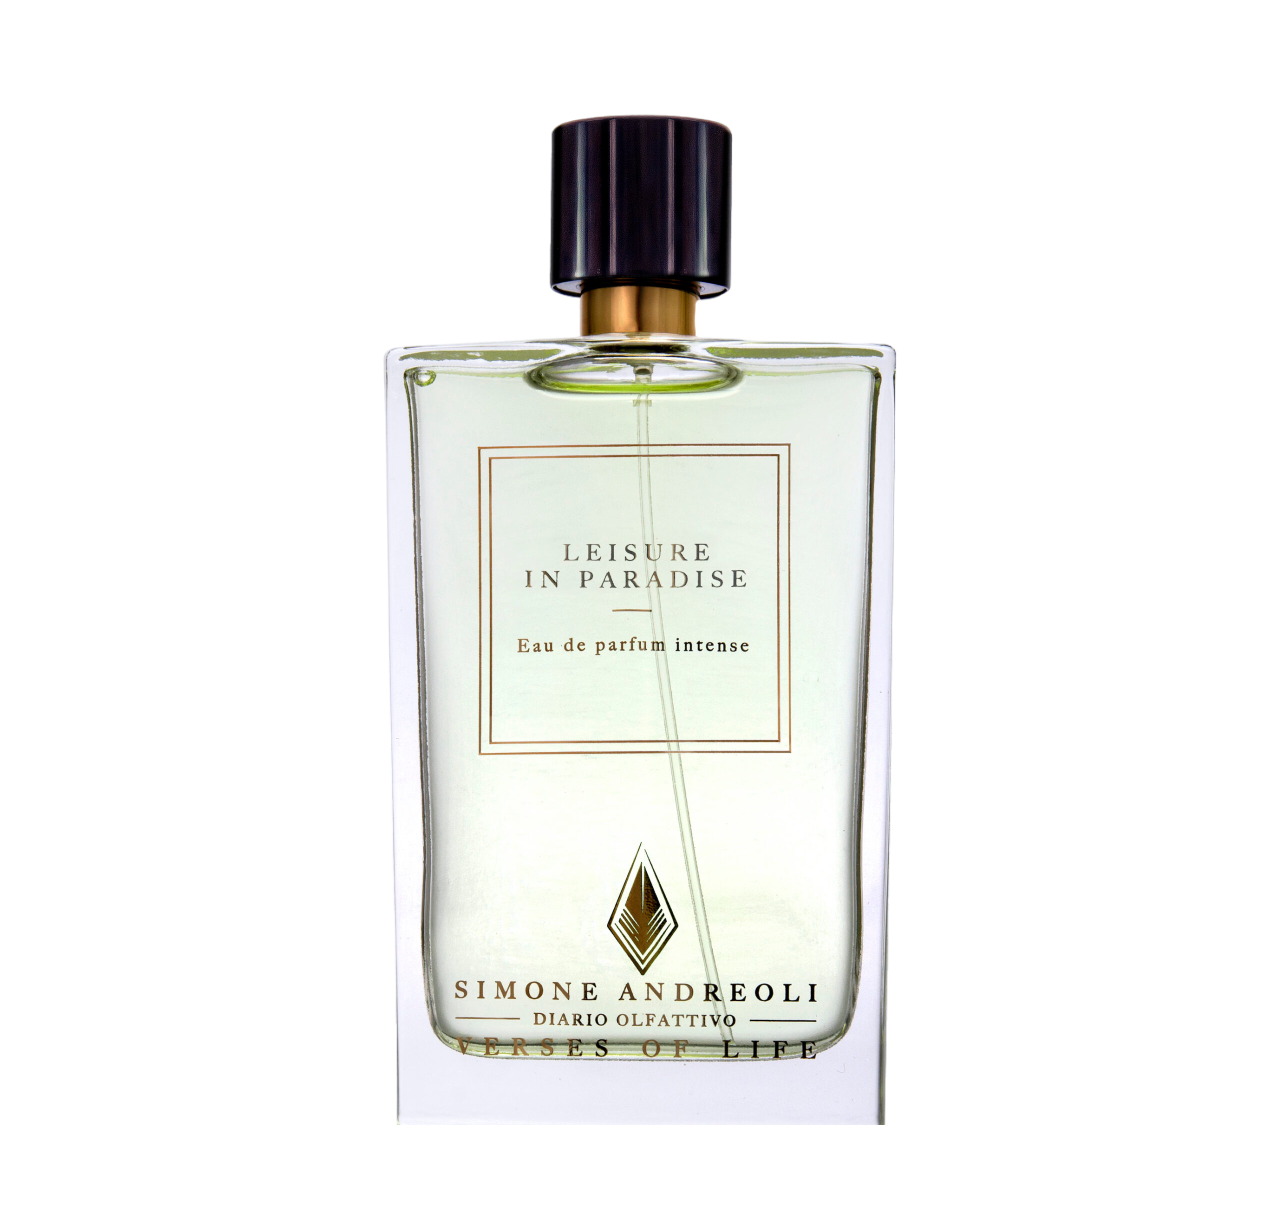 Simone Andreoli Leisure in Paradise Samples Decants